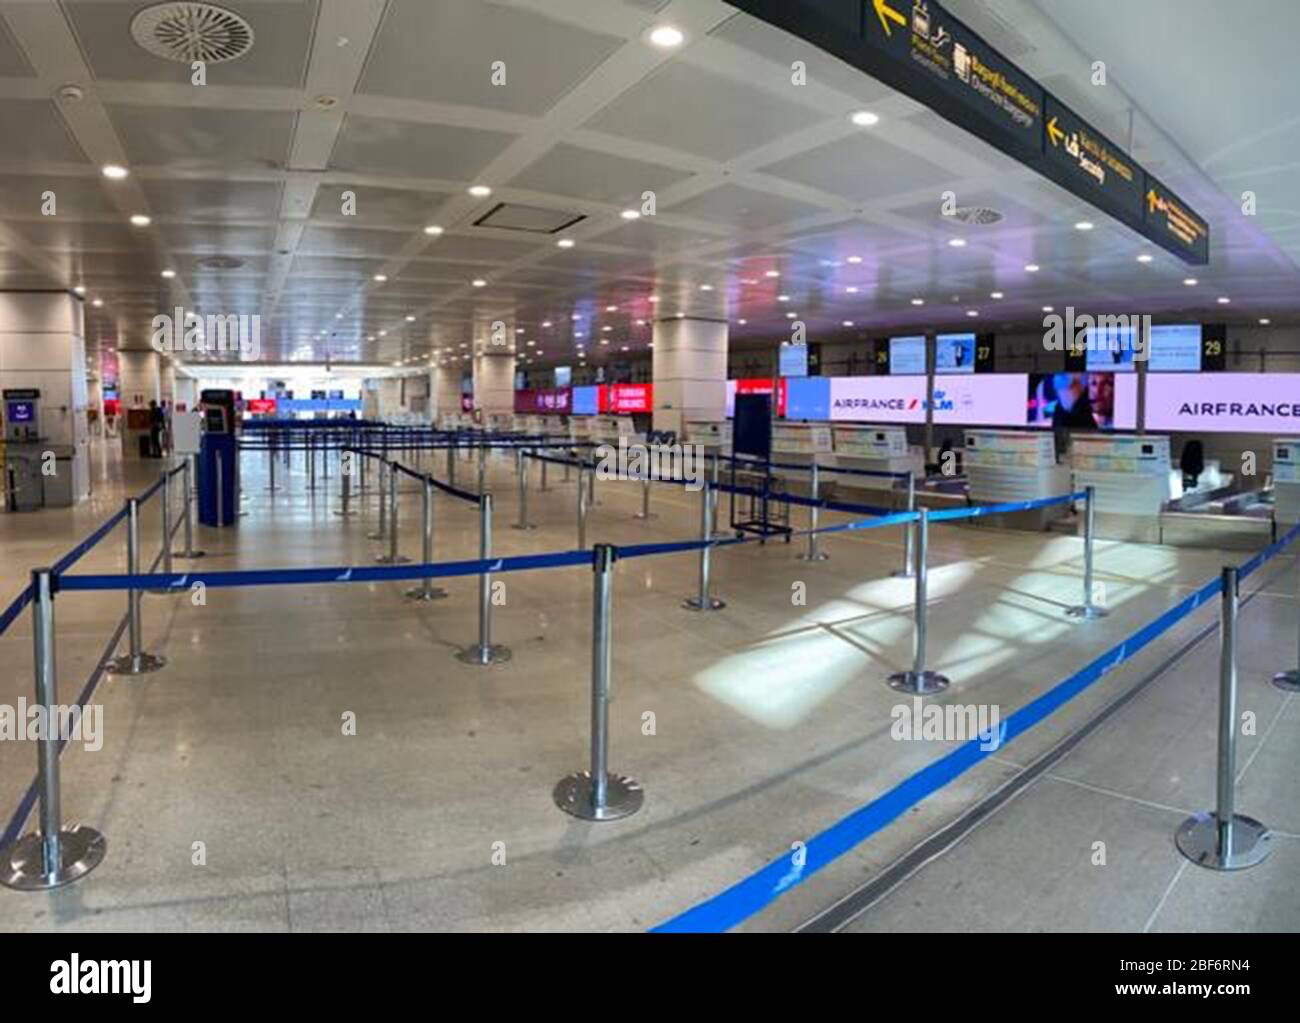 04/03/2020 Tessera (VE) Italy Venice Airport - Marco Polo Airport Tessera  Many flights have been canceled due to the coronavirus because the Marco  Polo airport is practically empty. Cities in Italy are